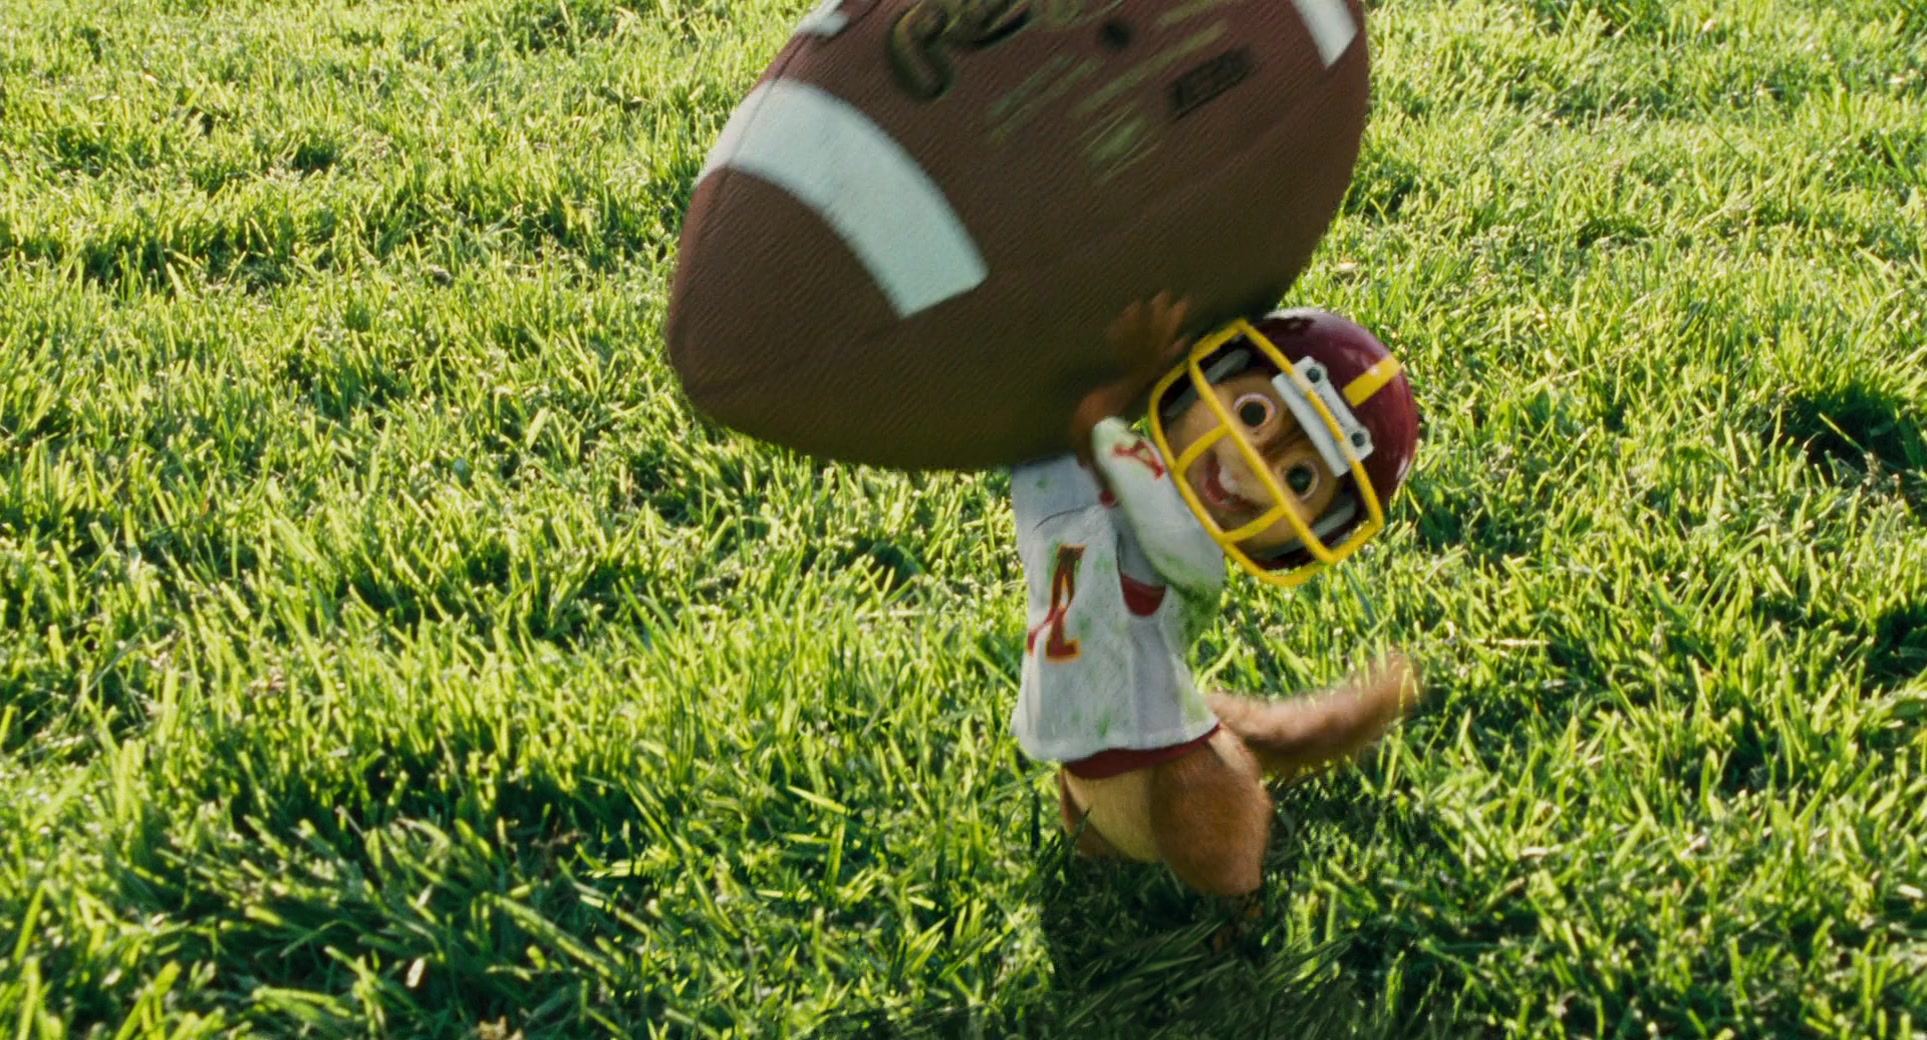 Rawlings Football in Alvin and the Chipmunks: The Squeakquel (2009) Movie1927 x 1040